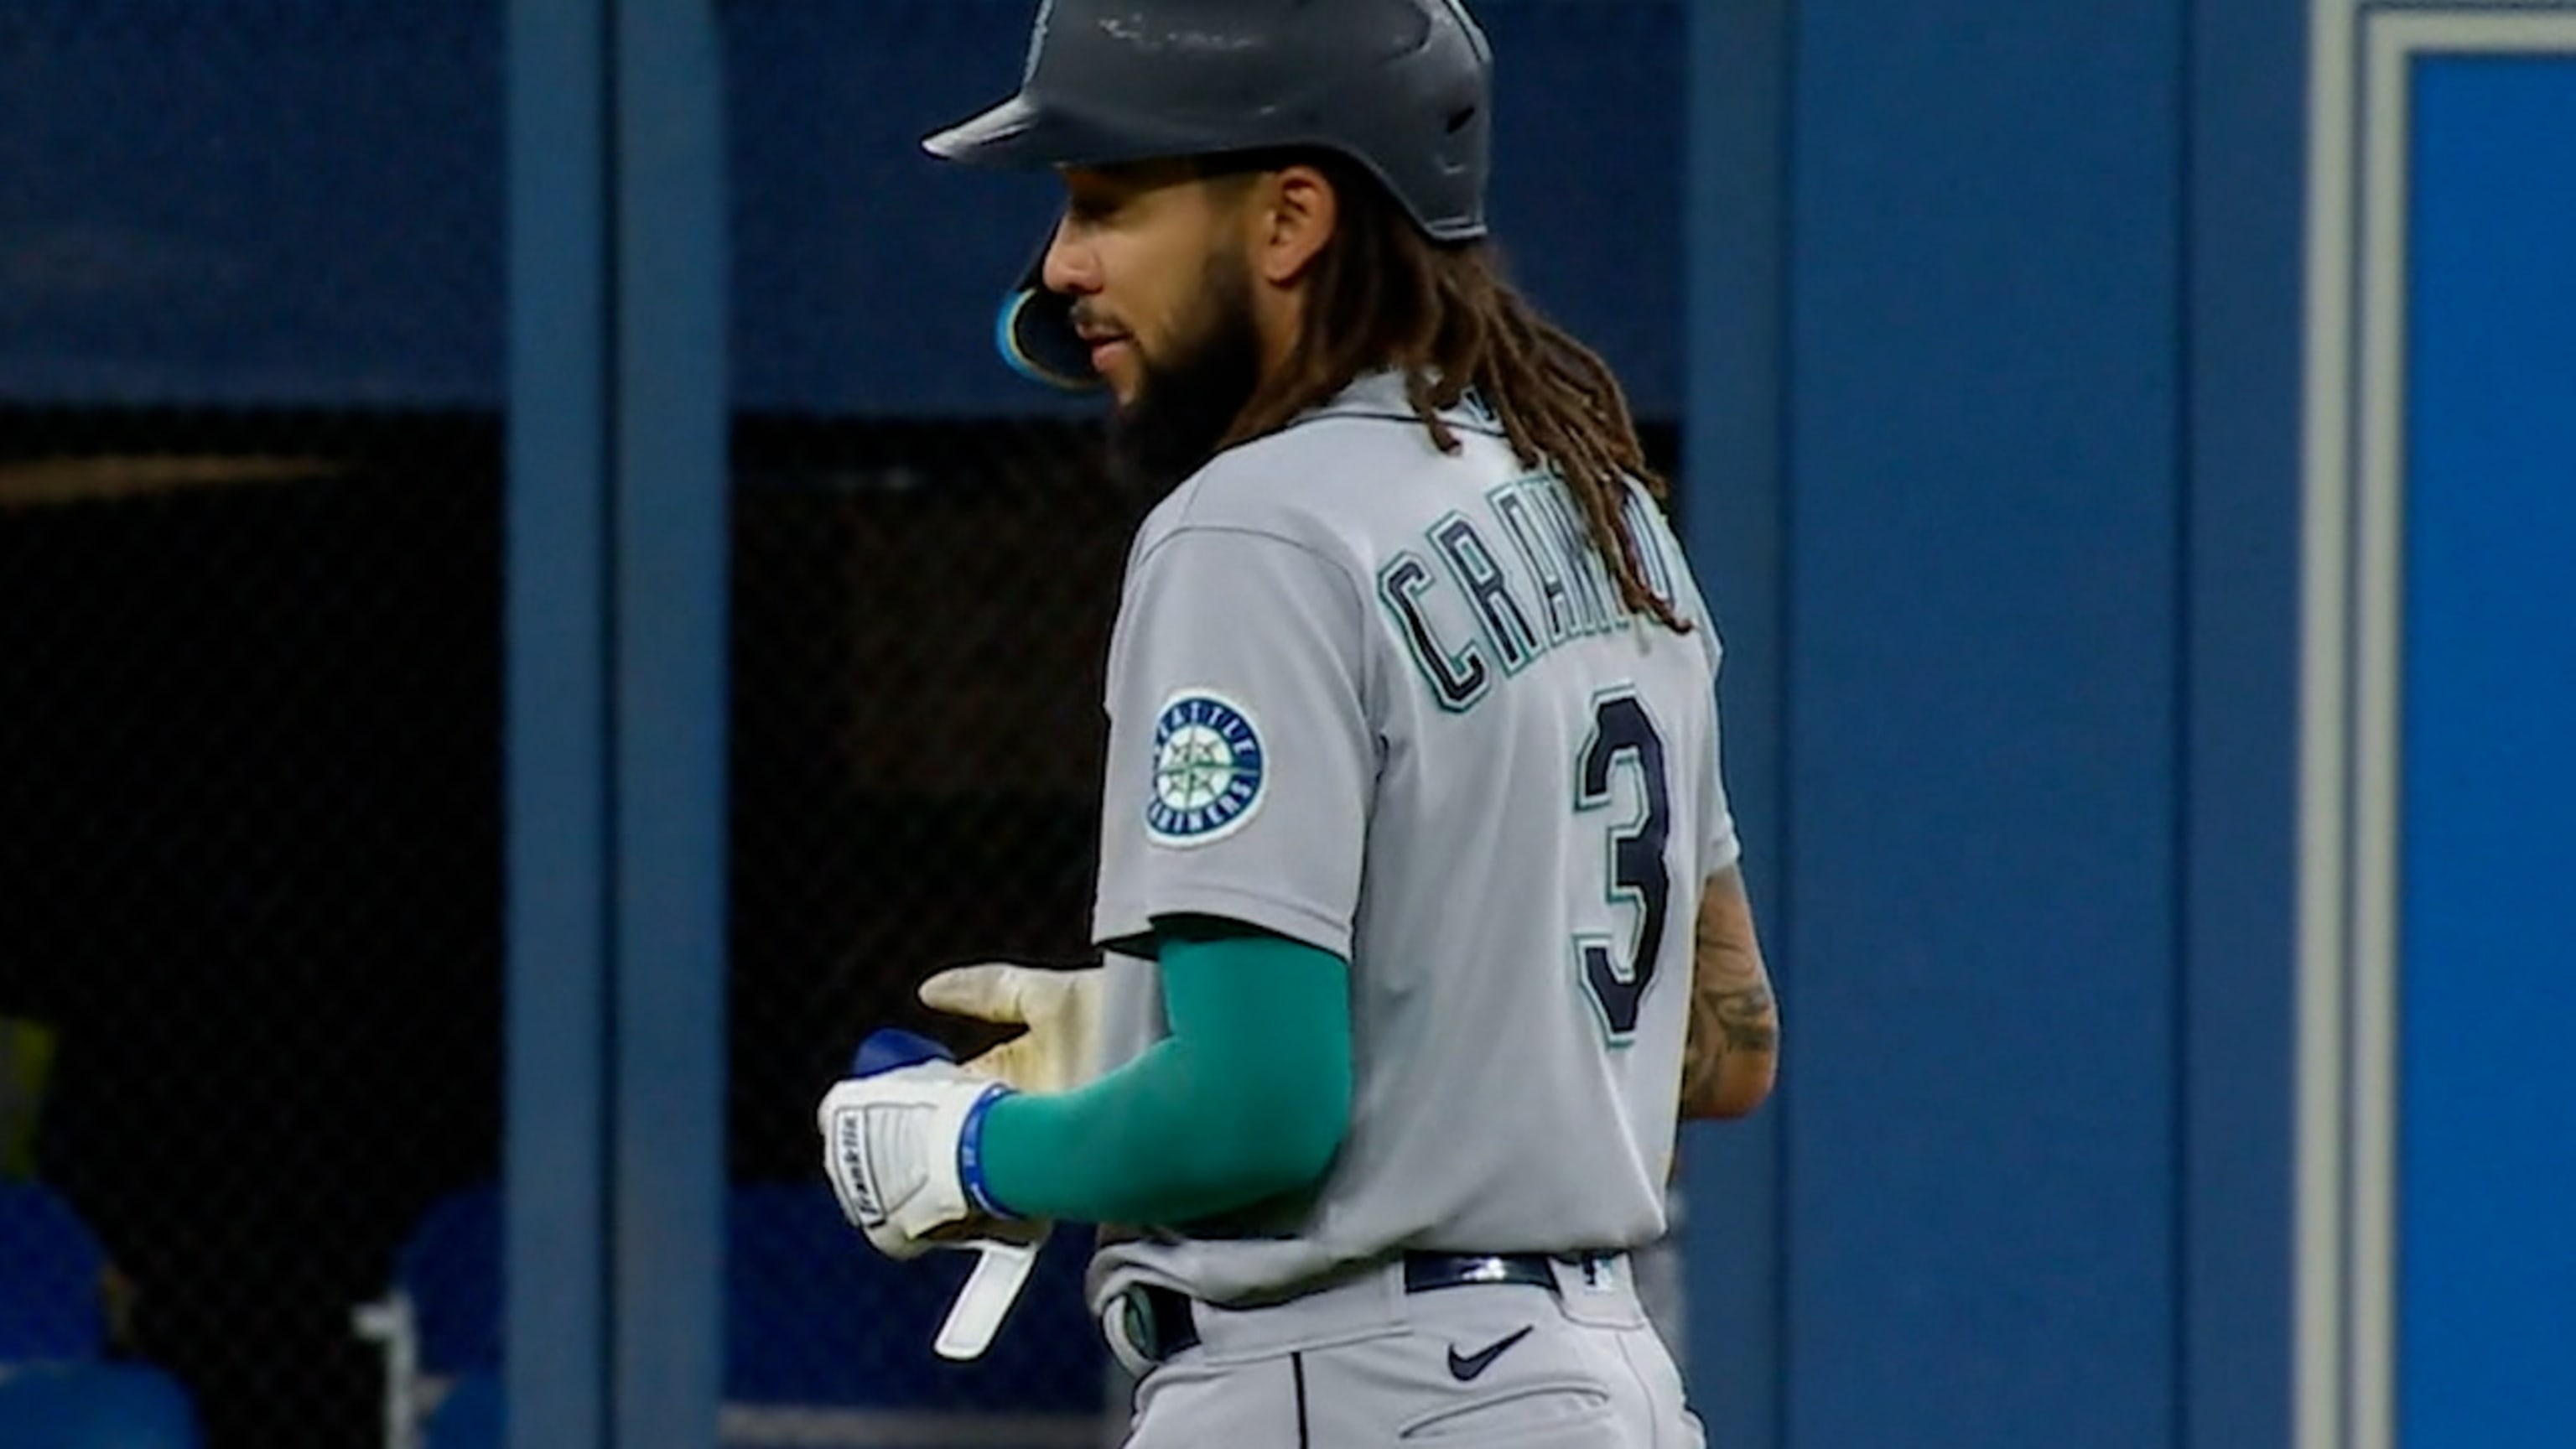 J.P. Crawford has a 2-out hit in the 9th inning to lift Mariners